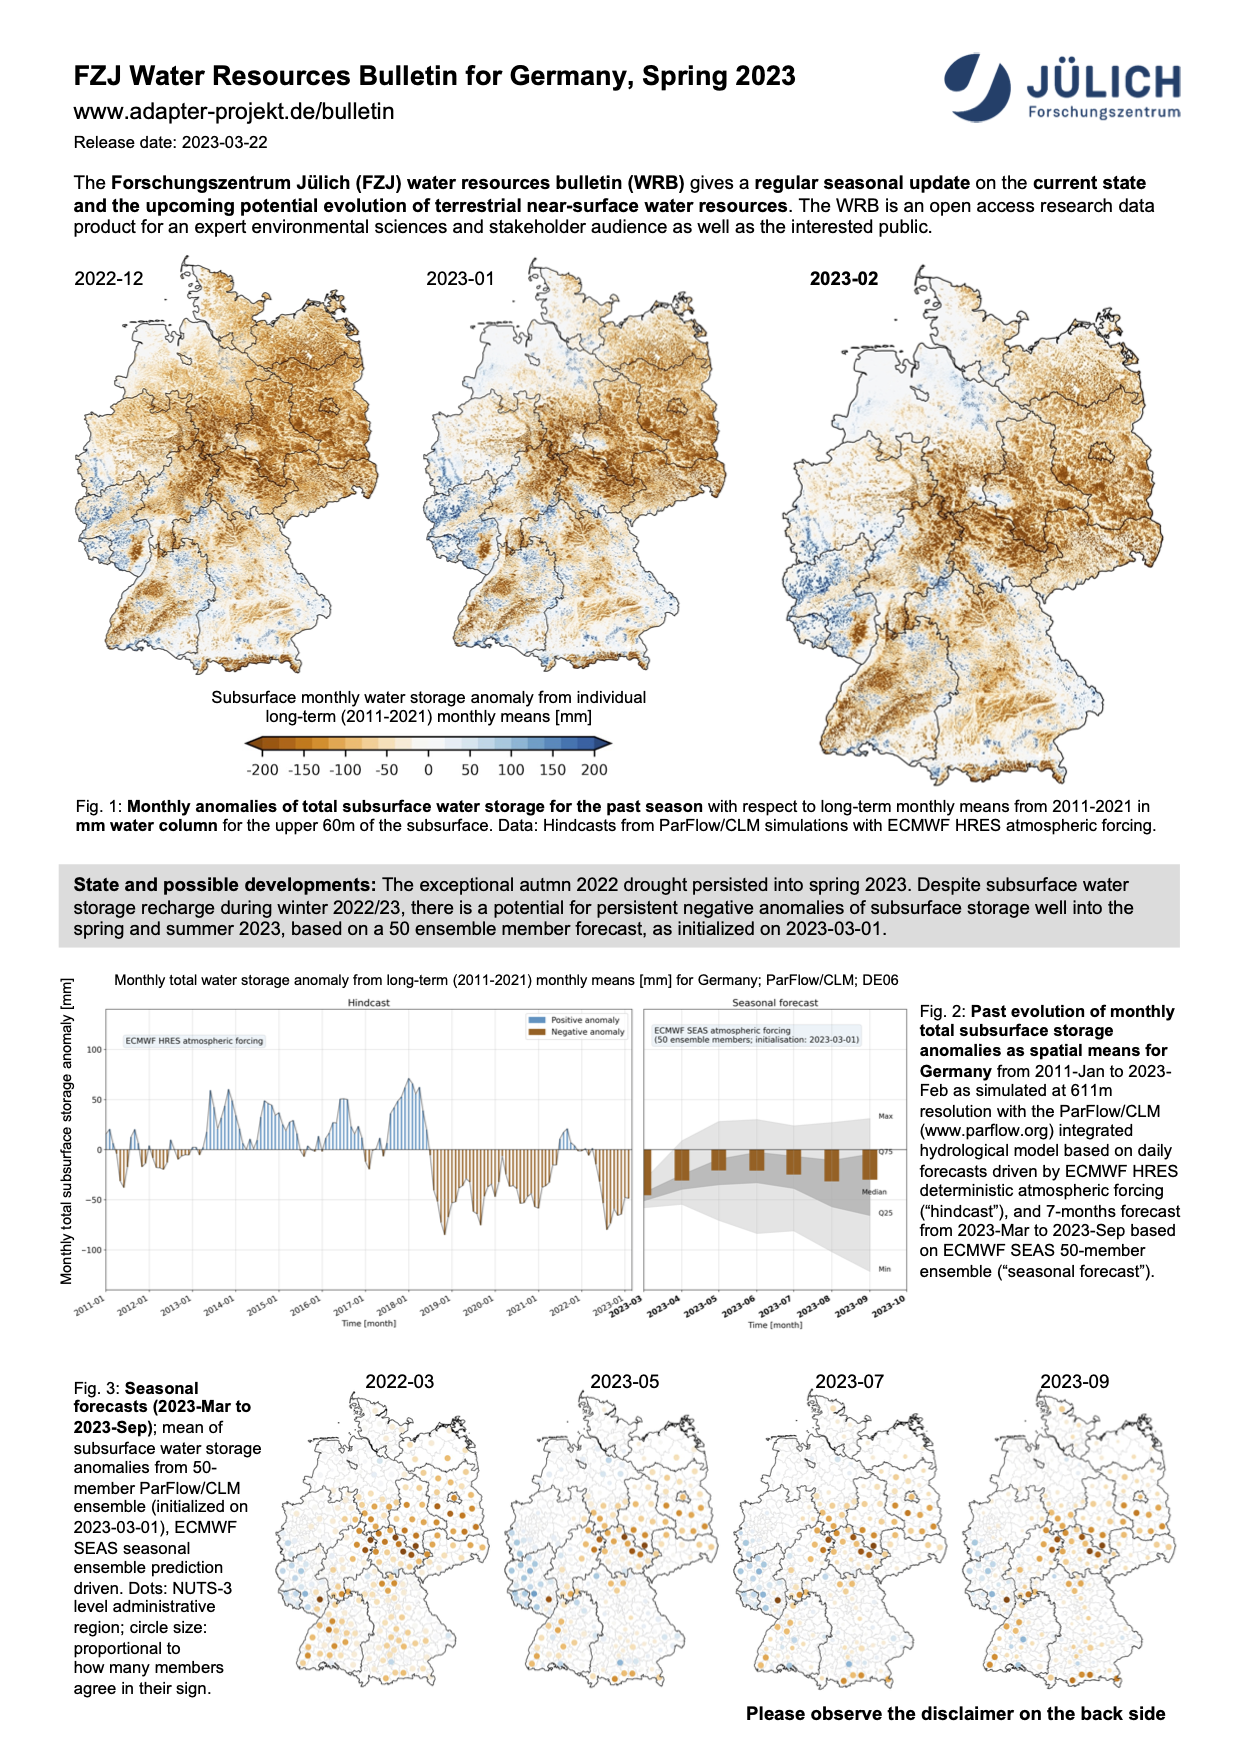 FZJ Water Resources Bulletin for Germany Spring 2023